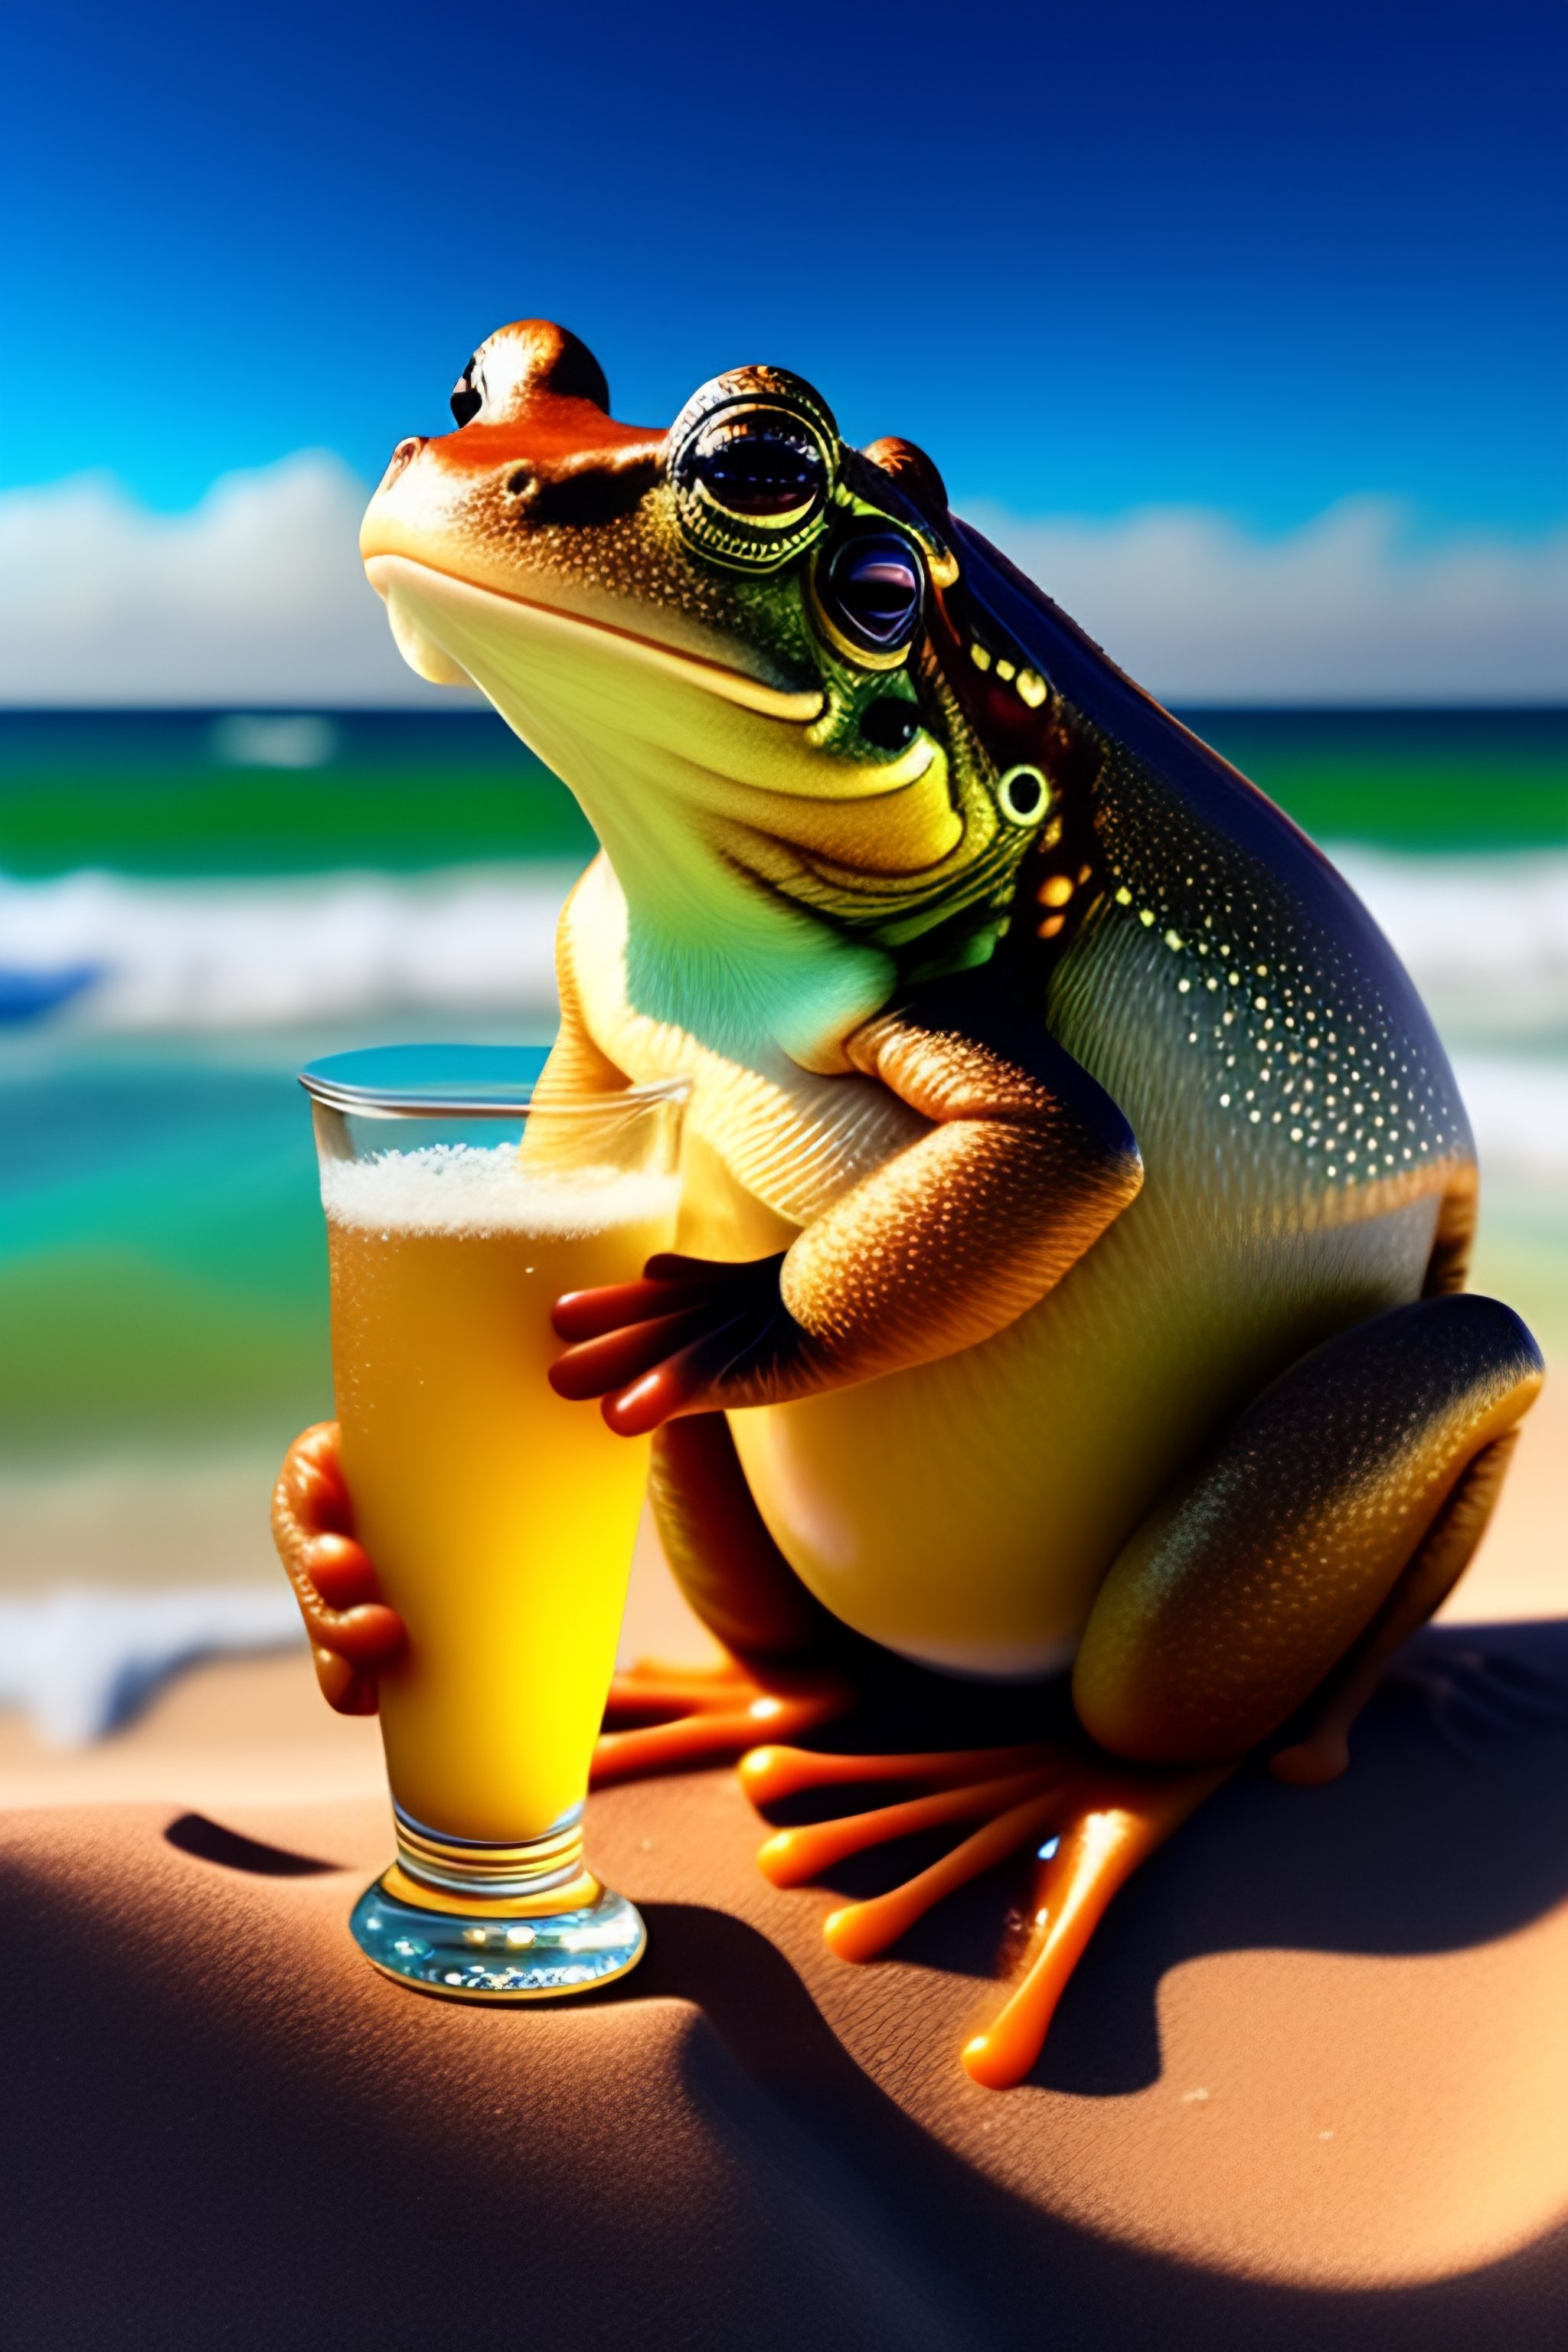 Lexica - A sexy frog eating peanuts on the beach